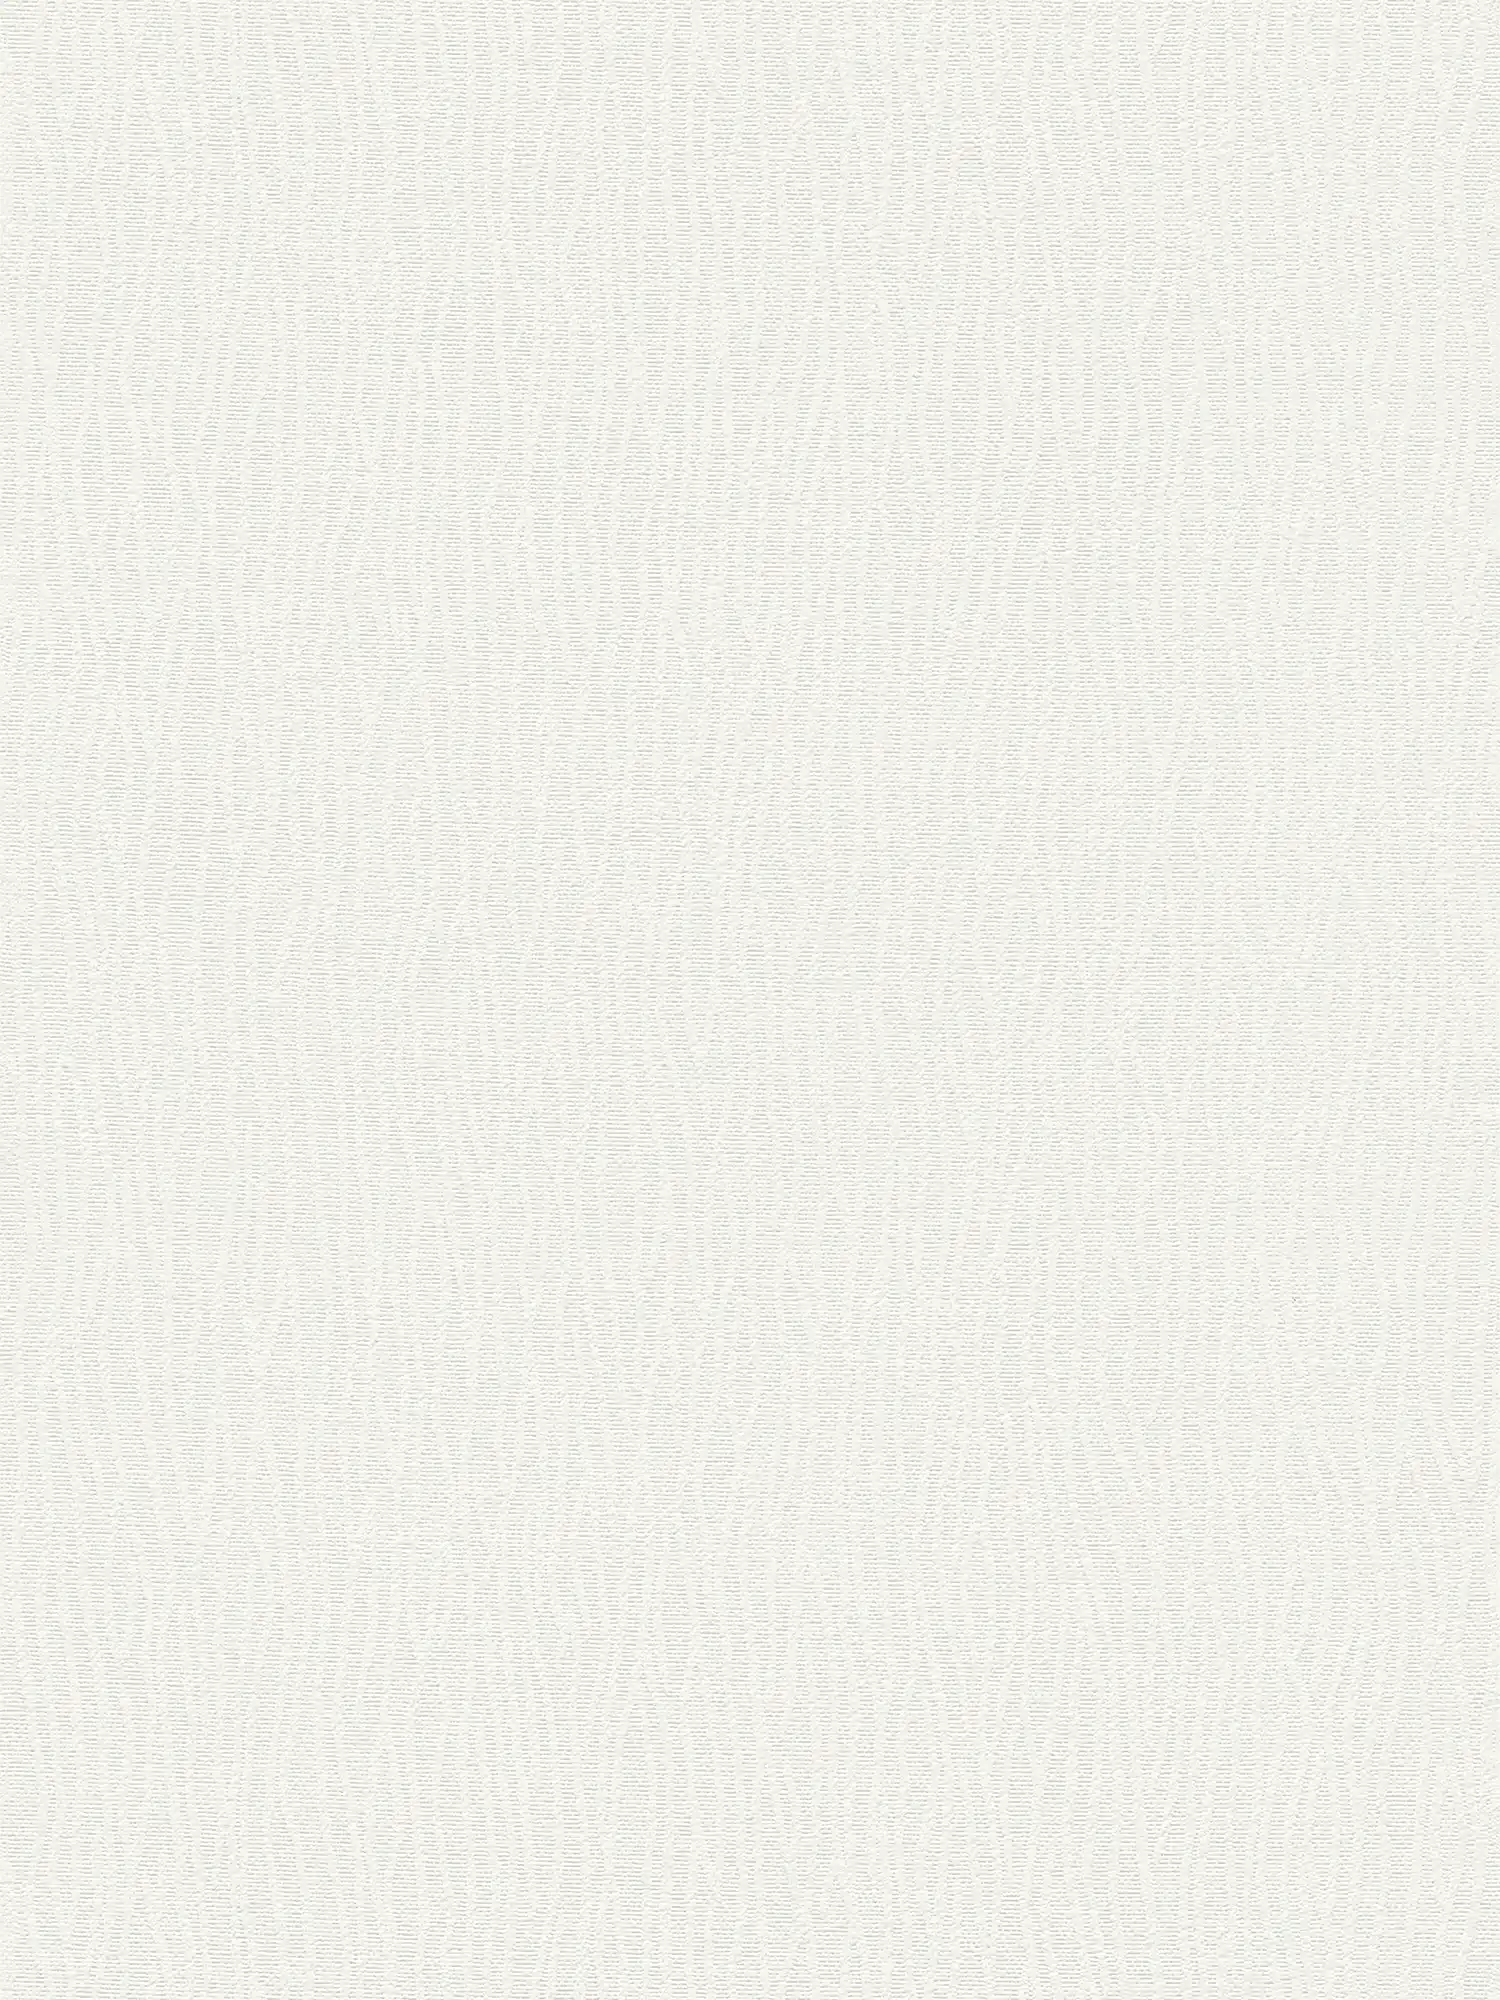 White wallpaper with texture pattern wavy lines
